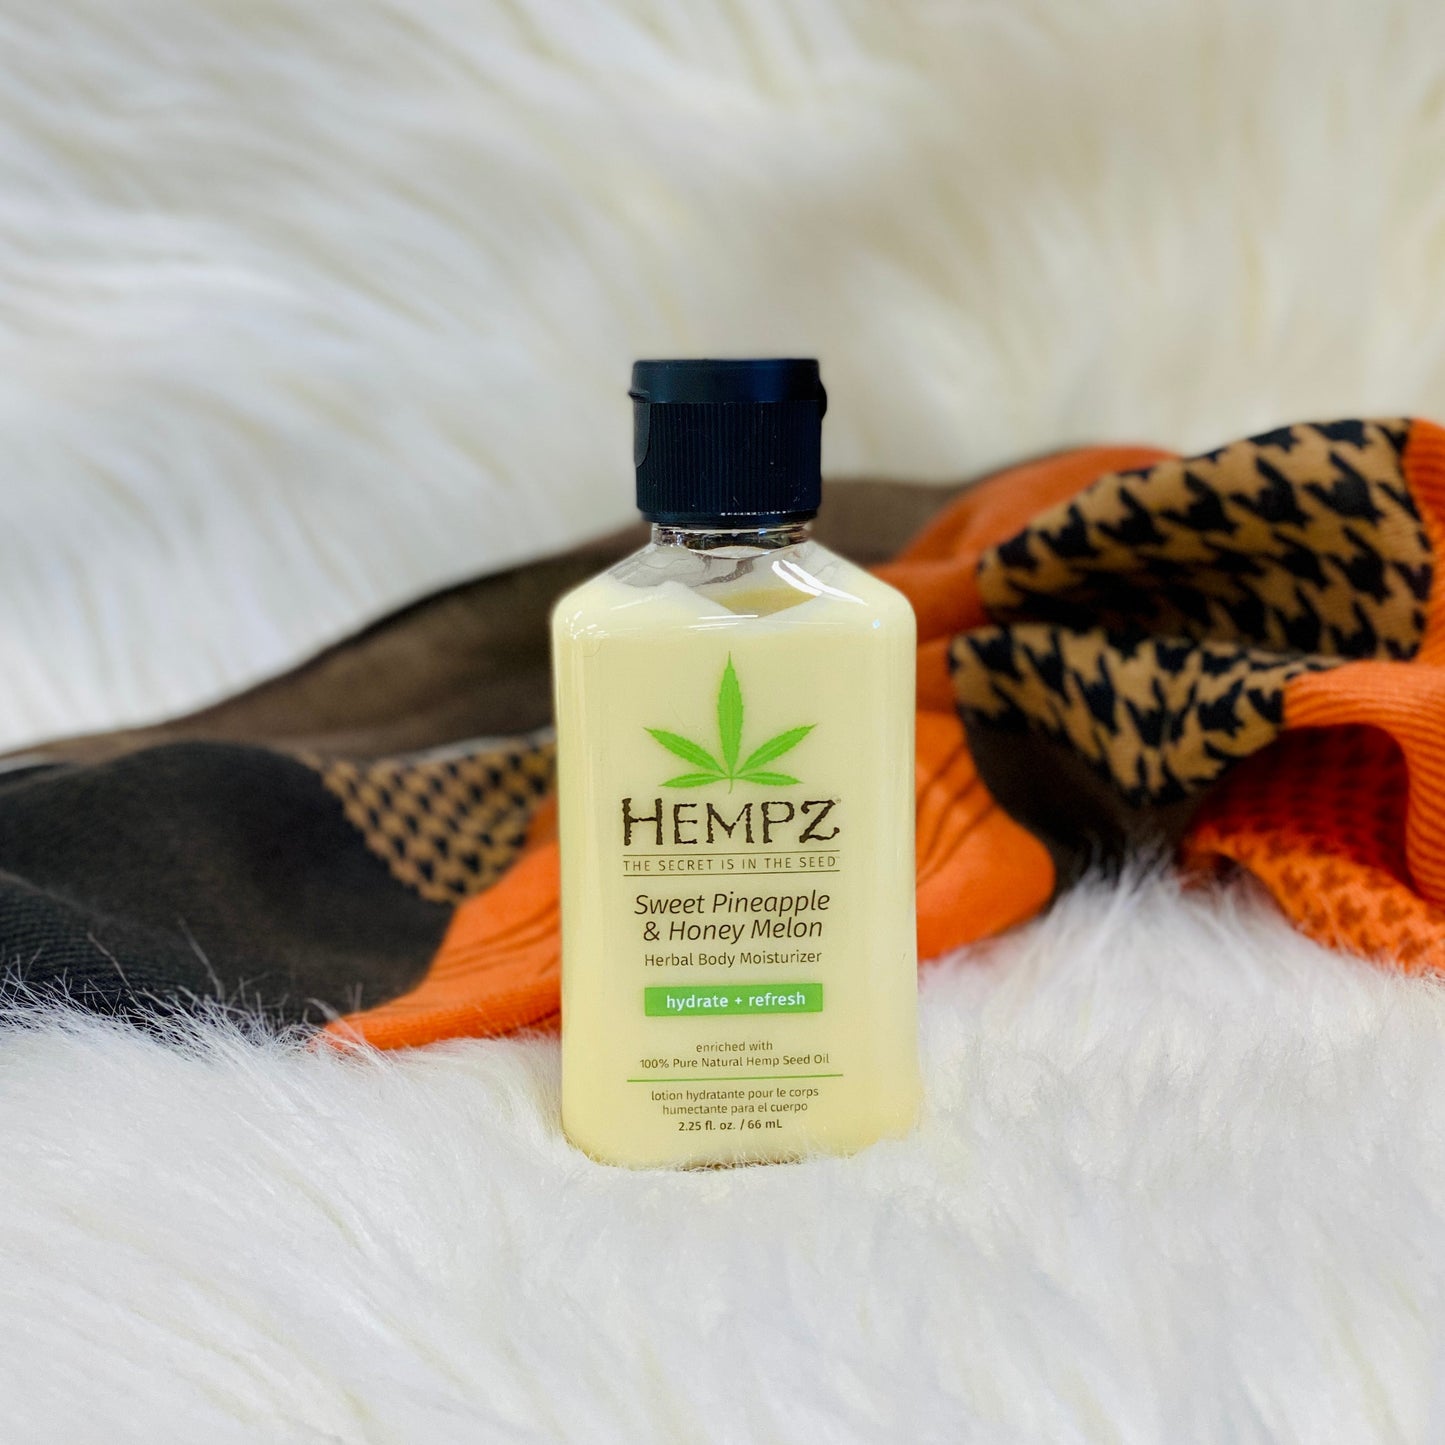 Hempz Travel Size Sweet Pineapple & Honey Melon Herbal Body Moisturizer        Benefits Powered with pineapple and honey melon extracts to help condition, soften and hydrate the skin Helps even skin tone, while keeping skin conditioned, with the naturally anti-inflammatory properties of jojoba seed oil Moisturizes and softens skin with shea butter